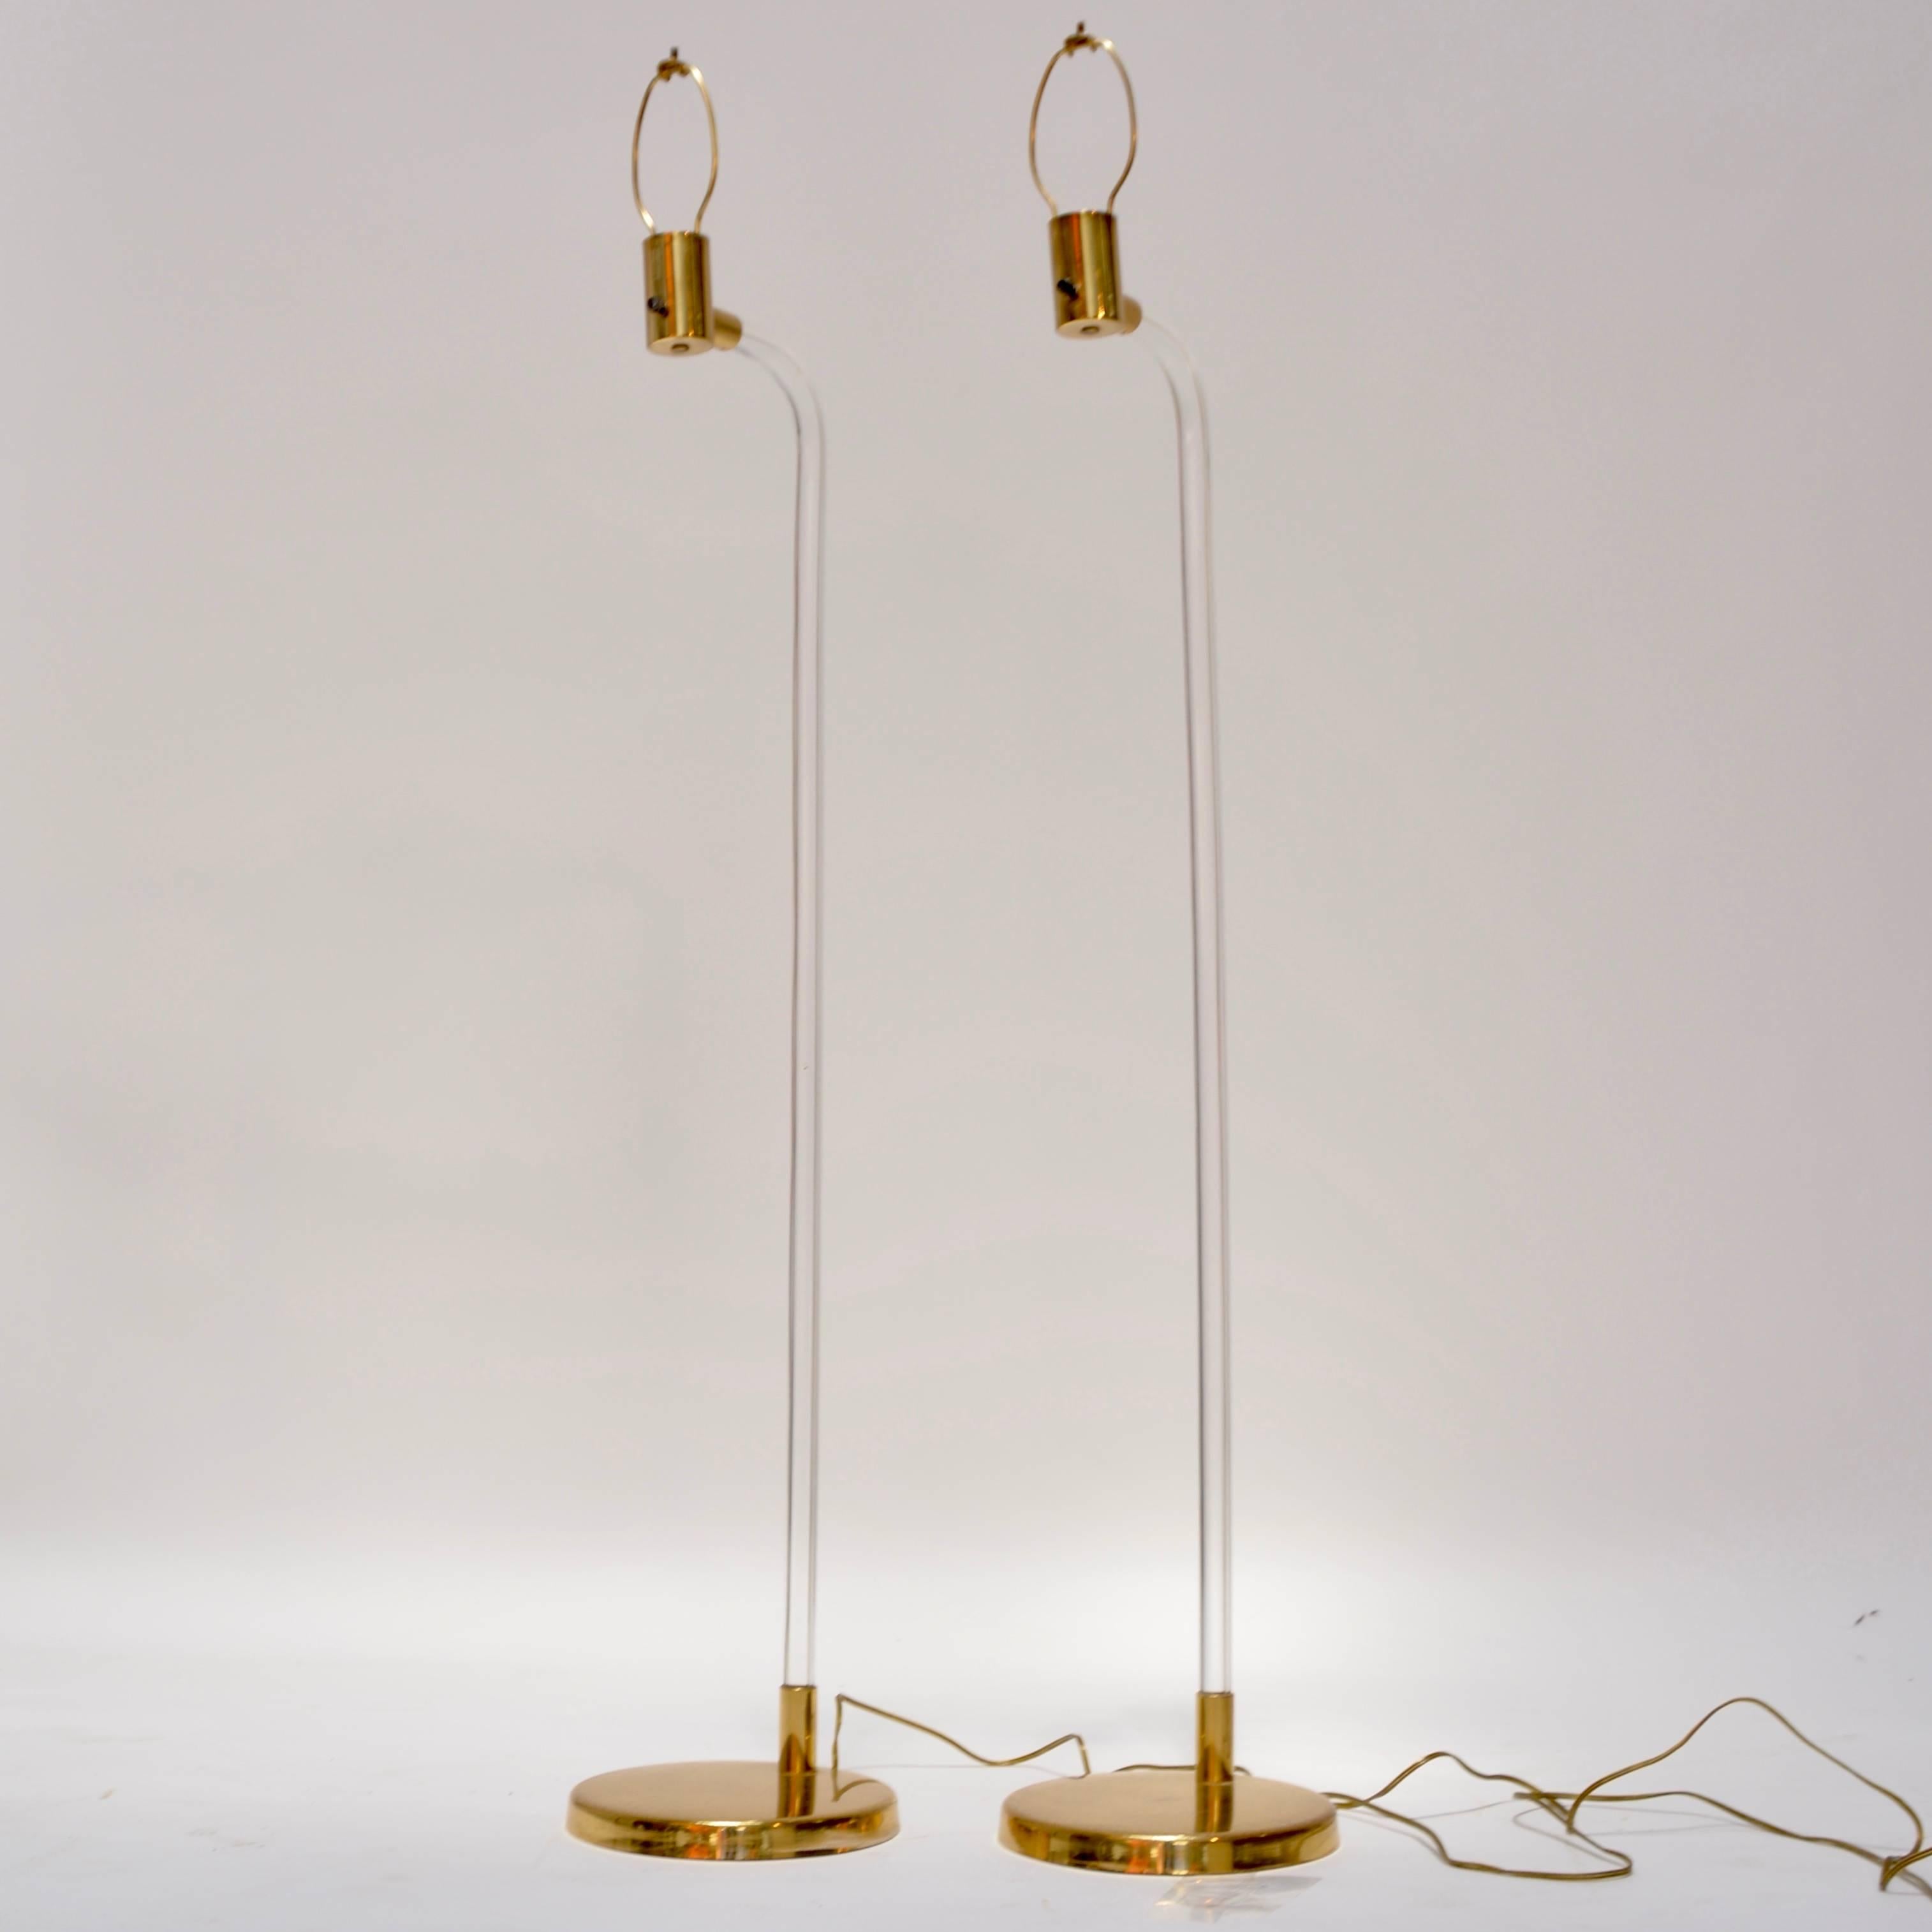 This is a pair of Lucite and brass floor lamps designed by Peter Hamburger for Knoll, circa 1970s.
 